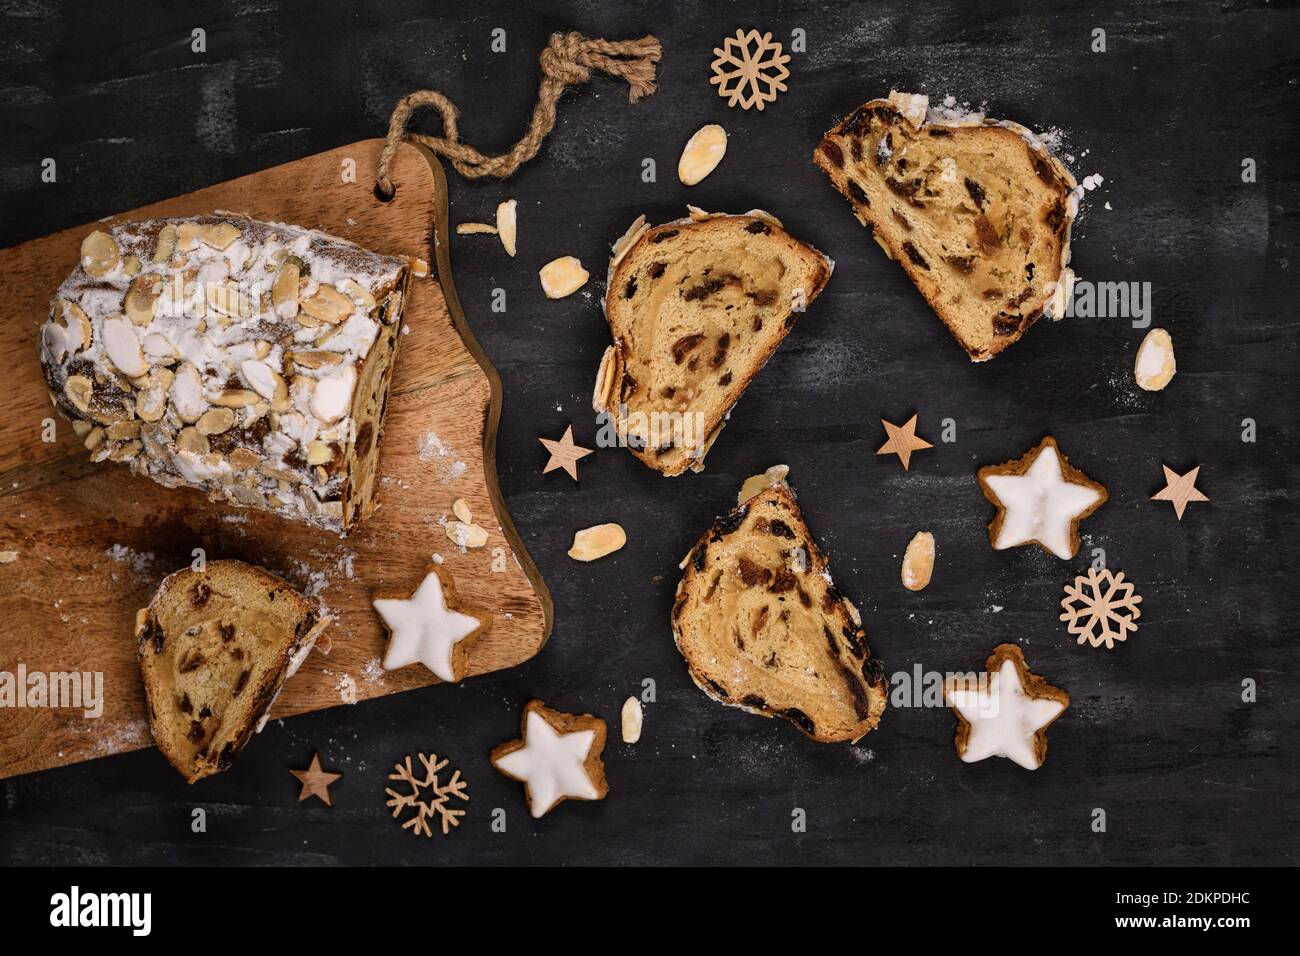 Slice of German Stollen cake, a fruit bread with nuts, spices, and dried fruits with powdered sugar traditionally served during Christmas time Stock Photo